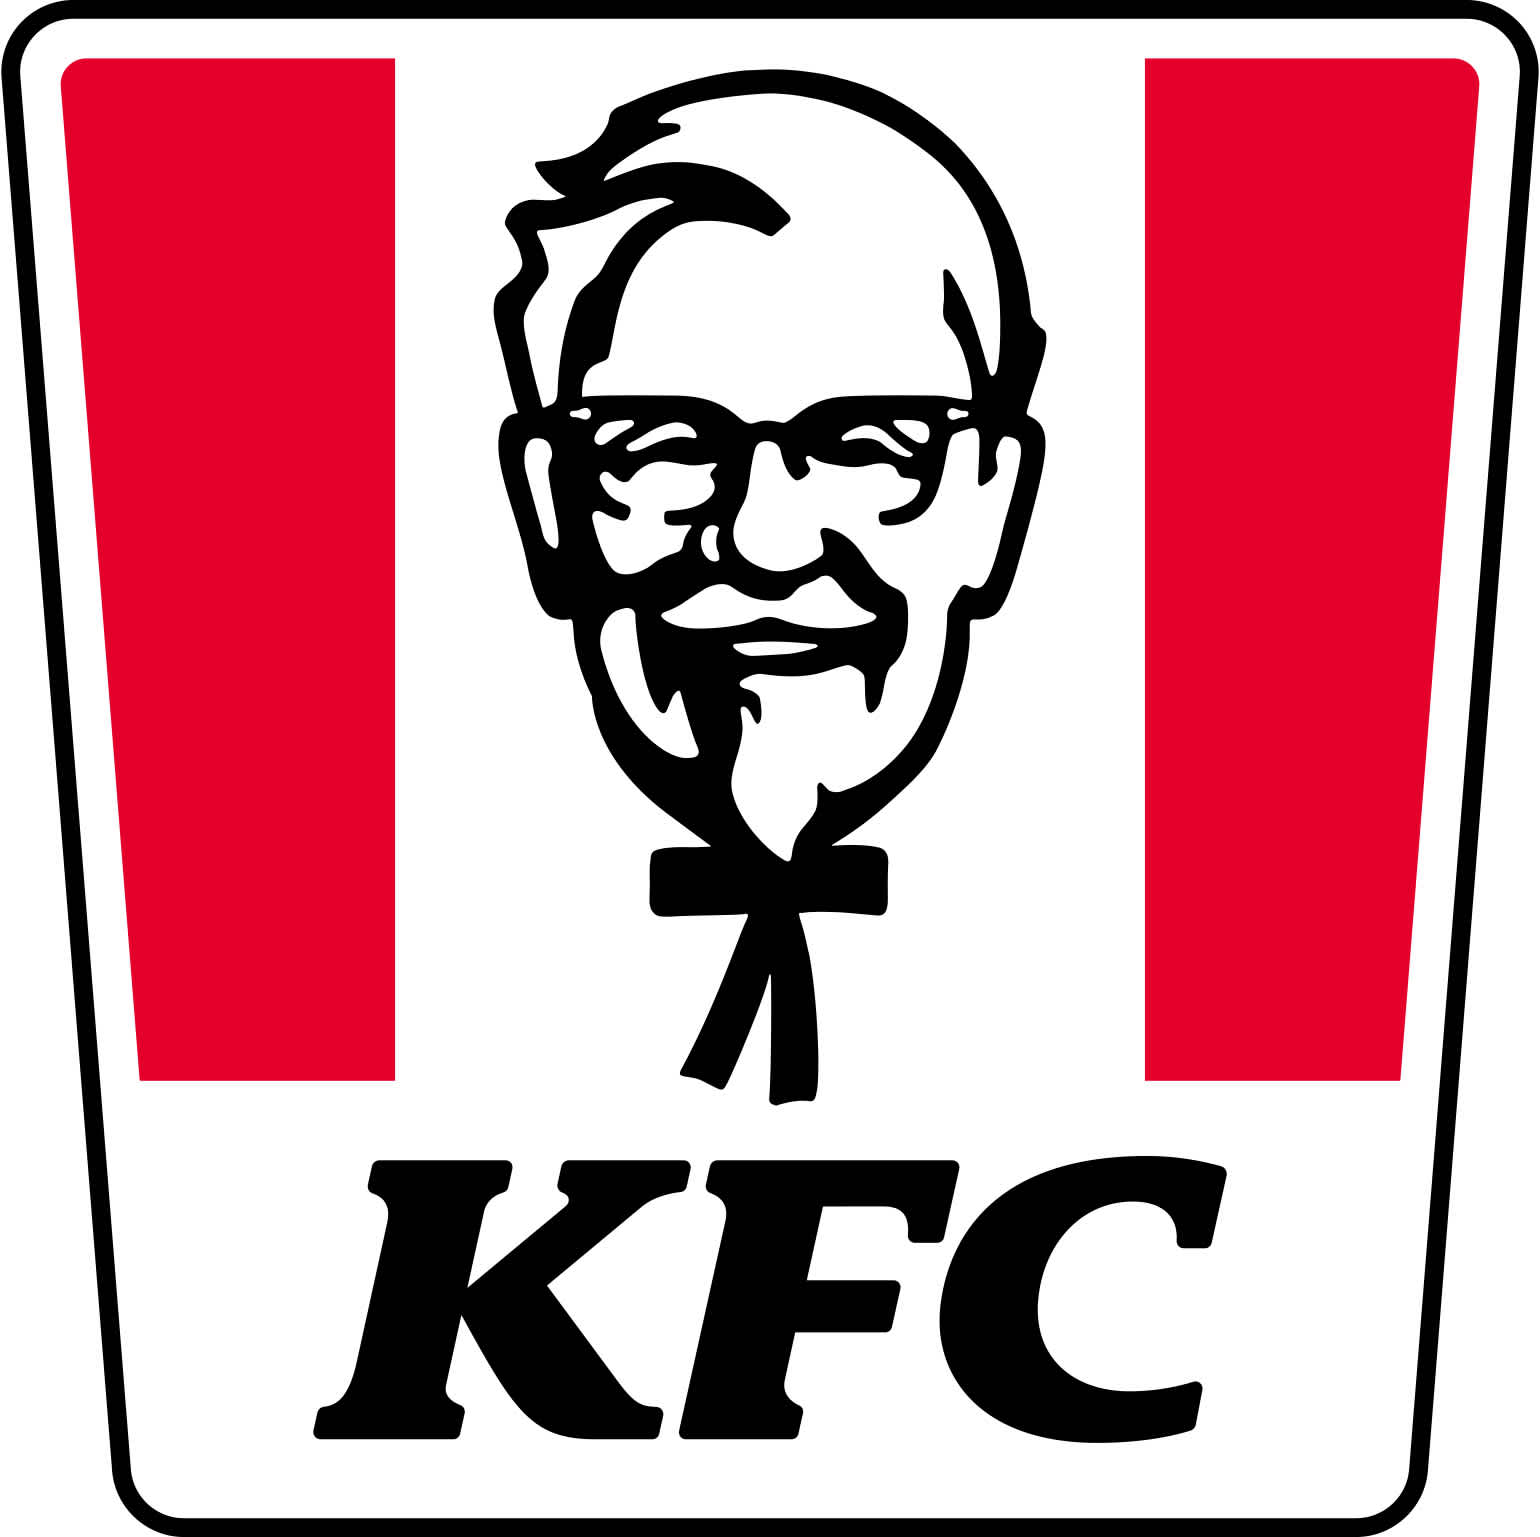 COMIC CON AFRICA AND KFC ANNOUNCE 2019 AND 2020 PARTNERSHIP